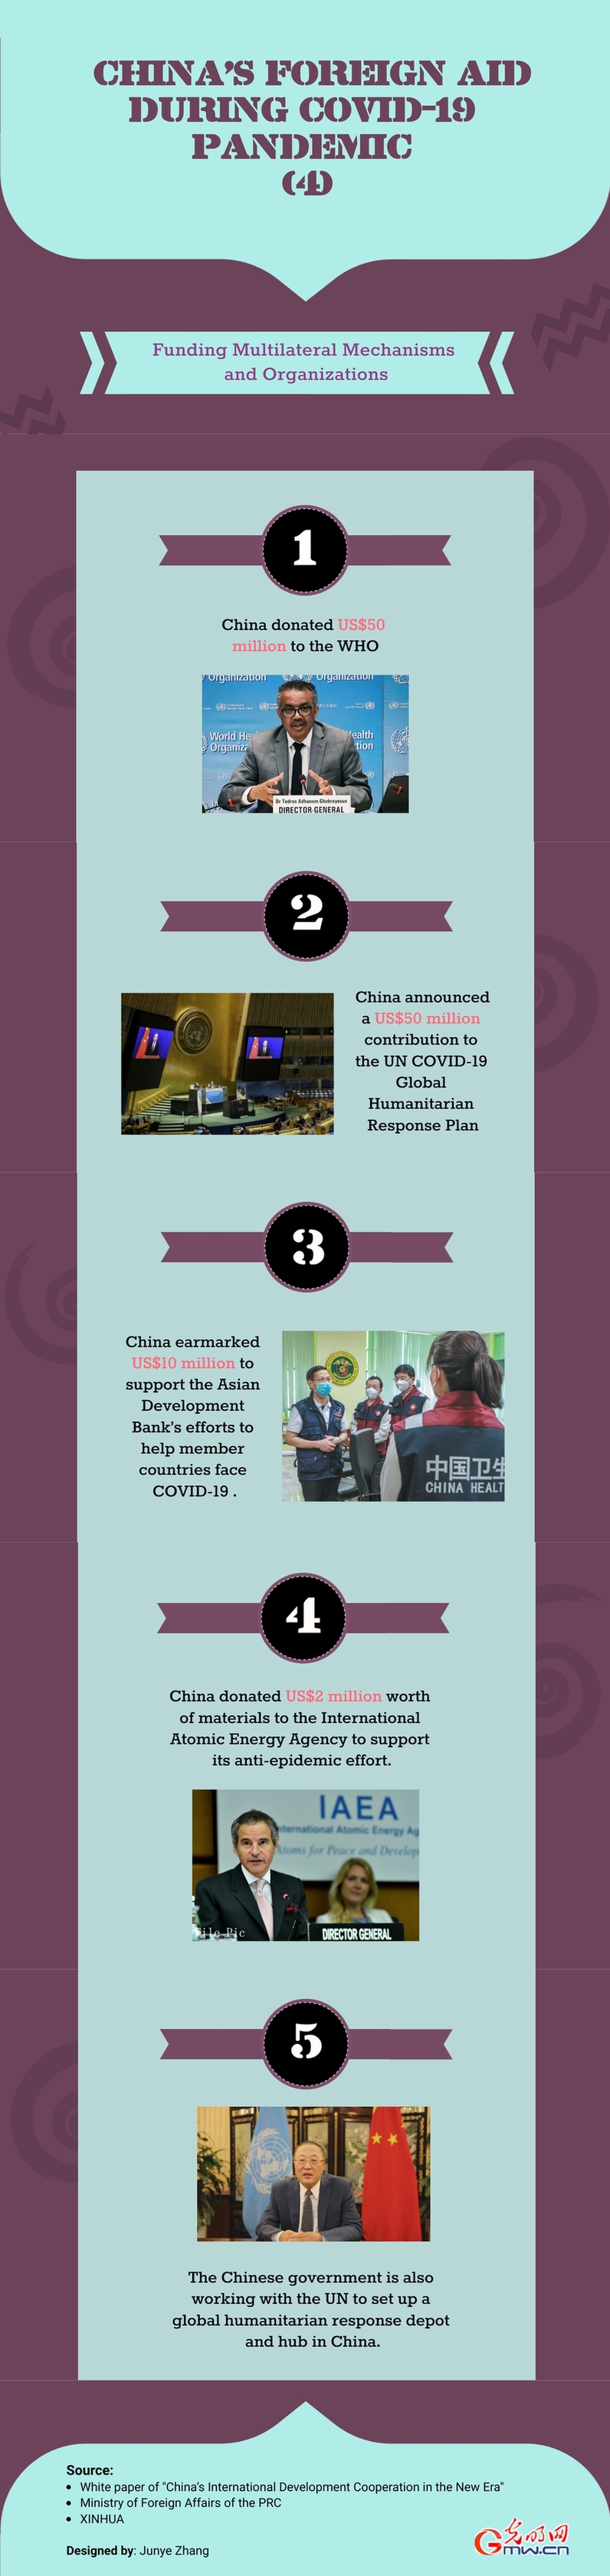 Infographic: China’s Foreign Aid during COVID-19 Pandemic (4)——Funding Multilateral Mechanisms and Organizations